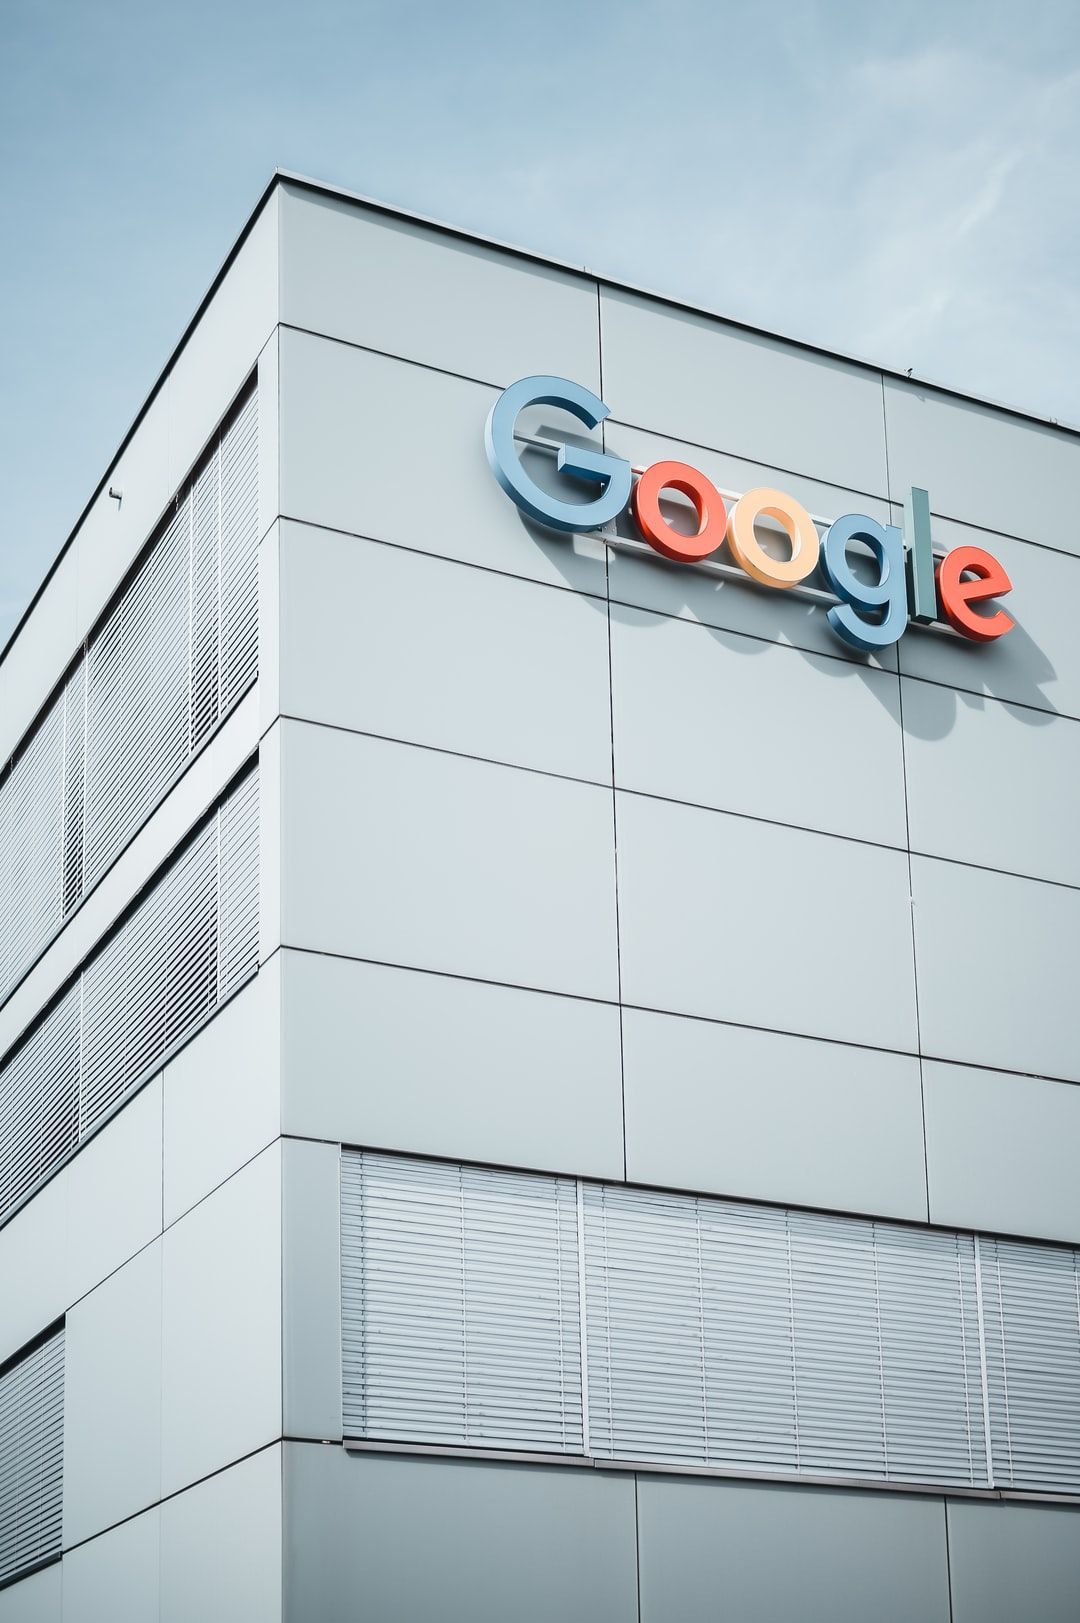 Google often ranks high as a top employer in annual company rankings and surveys, and a big part of it is because of the high salaries and company cul